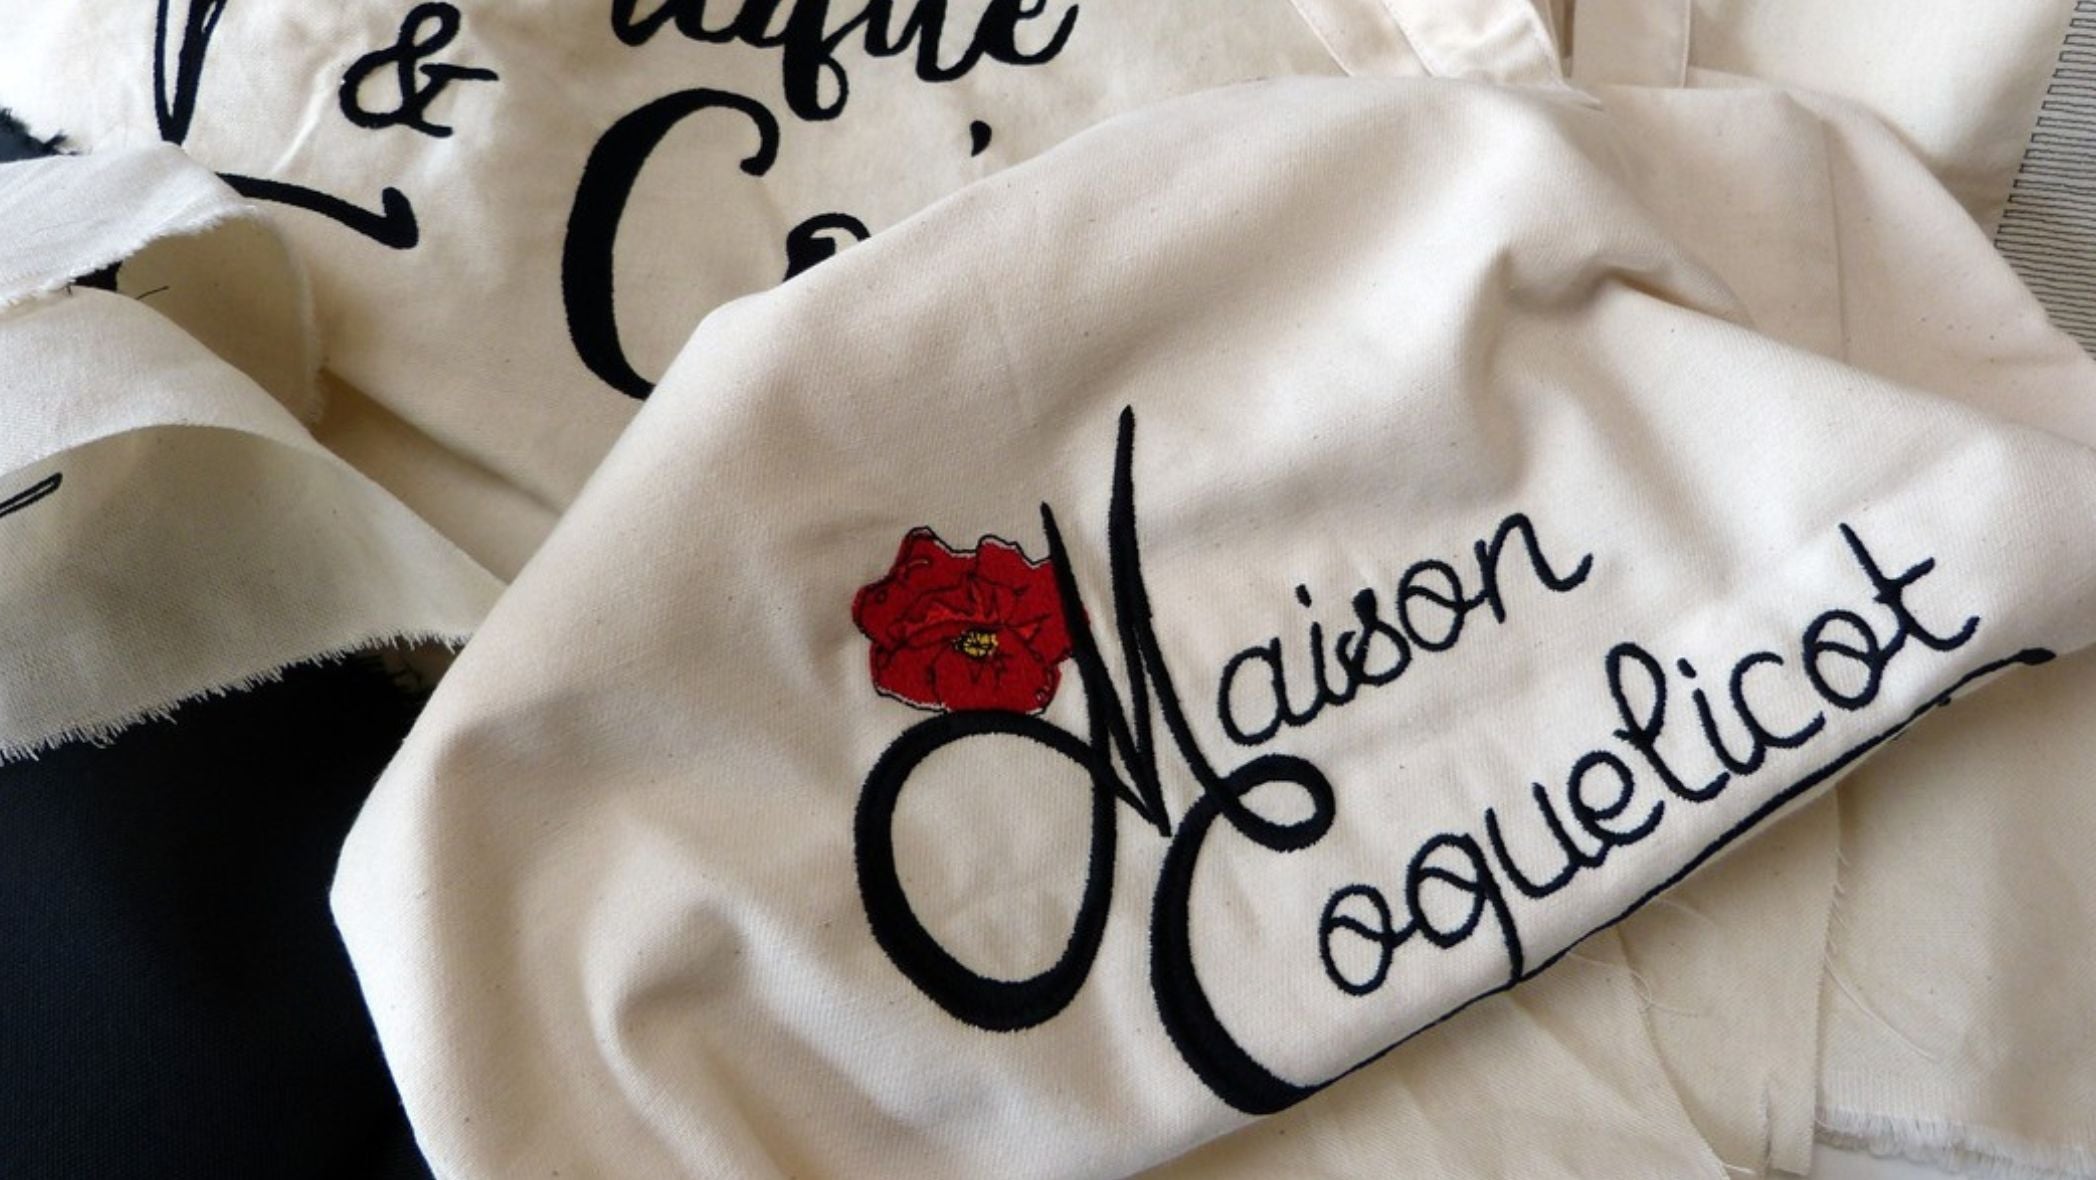 Discover the beautiful world of Maison Coquelicot